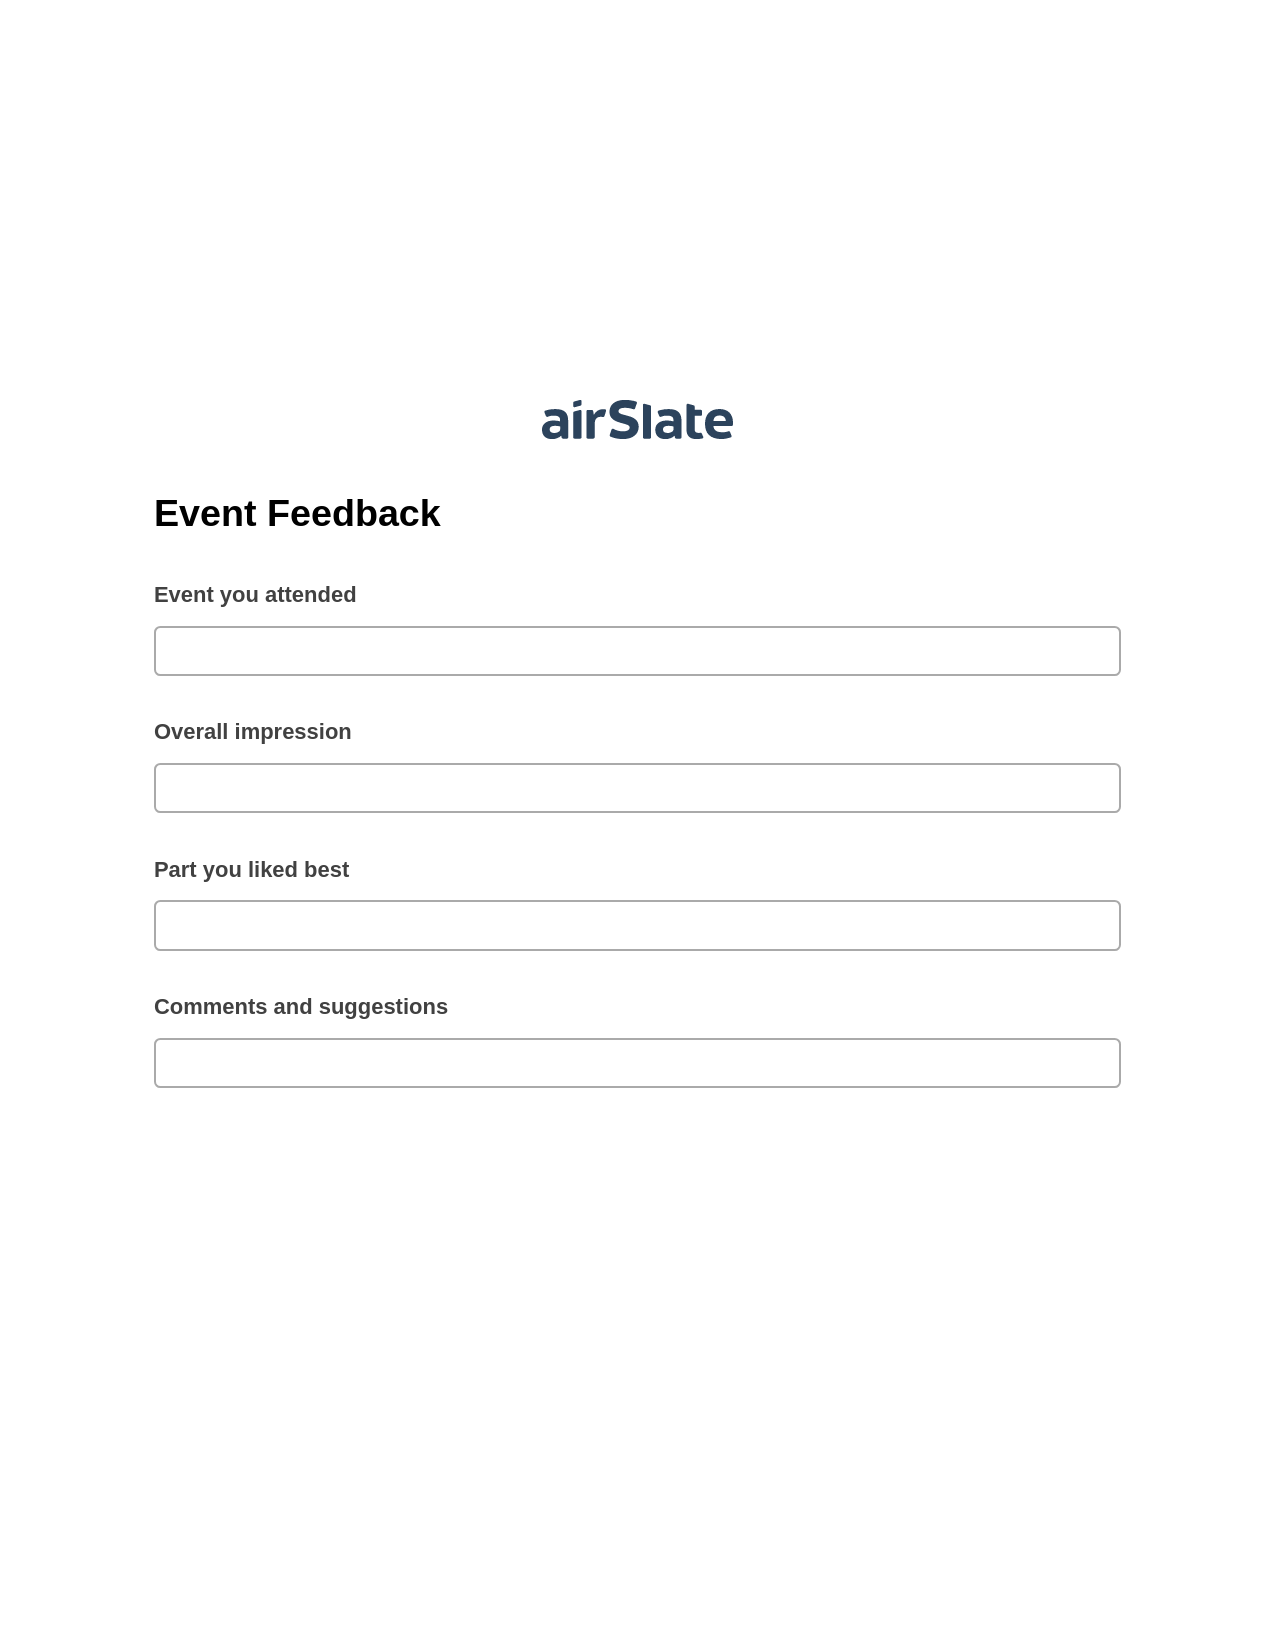 Event Feedback Pre-fill Dropdown from Airtable, Webhook Bot, Post-finish Document Bot